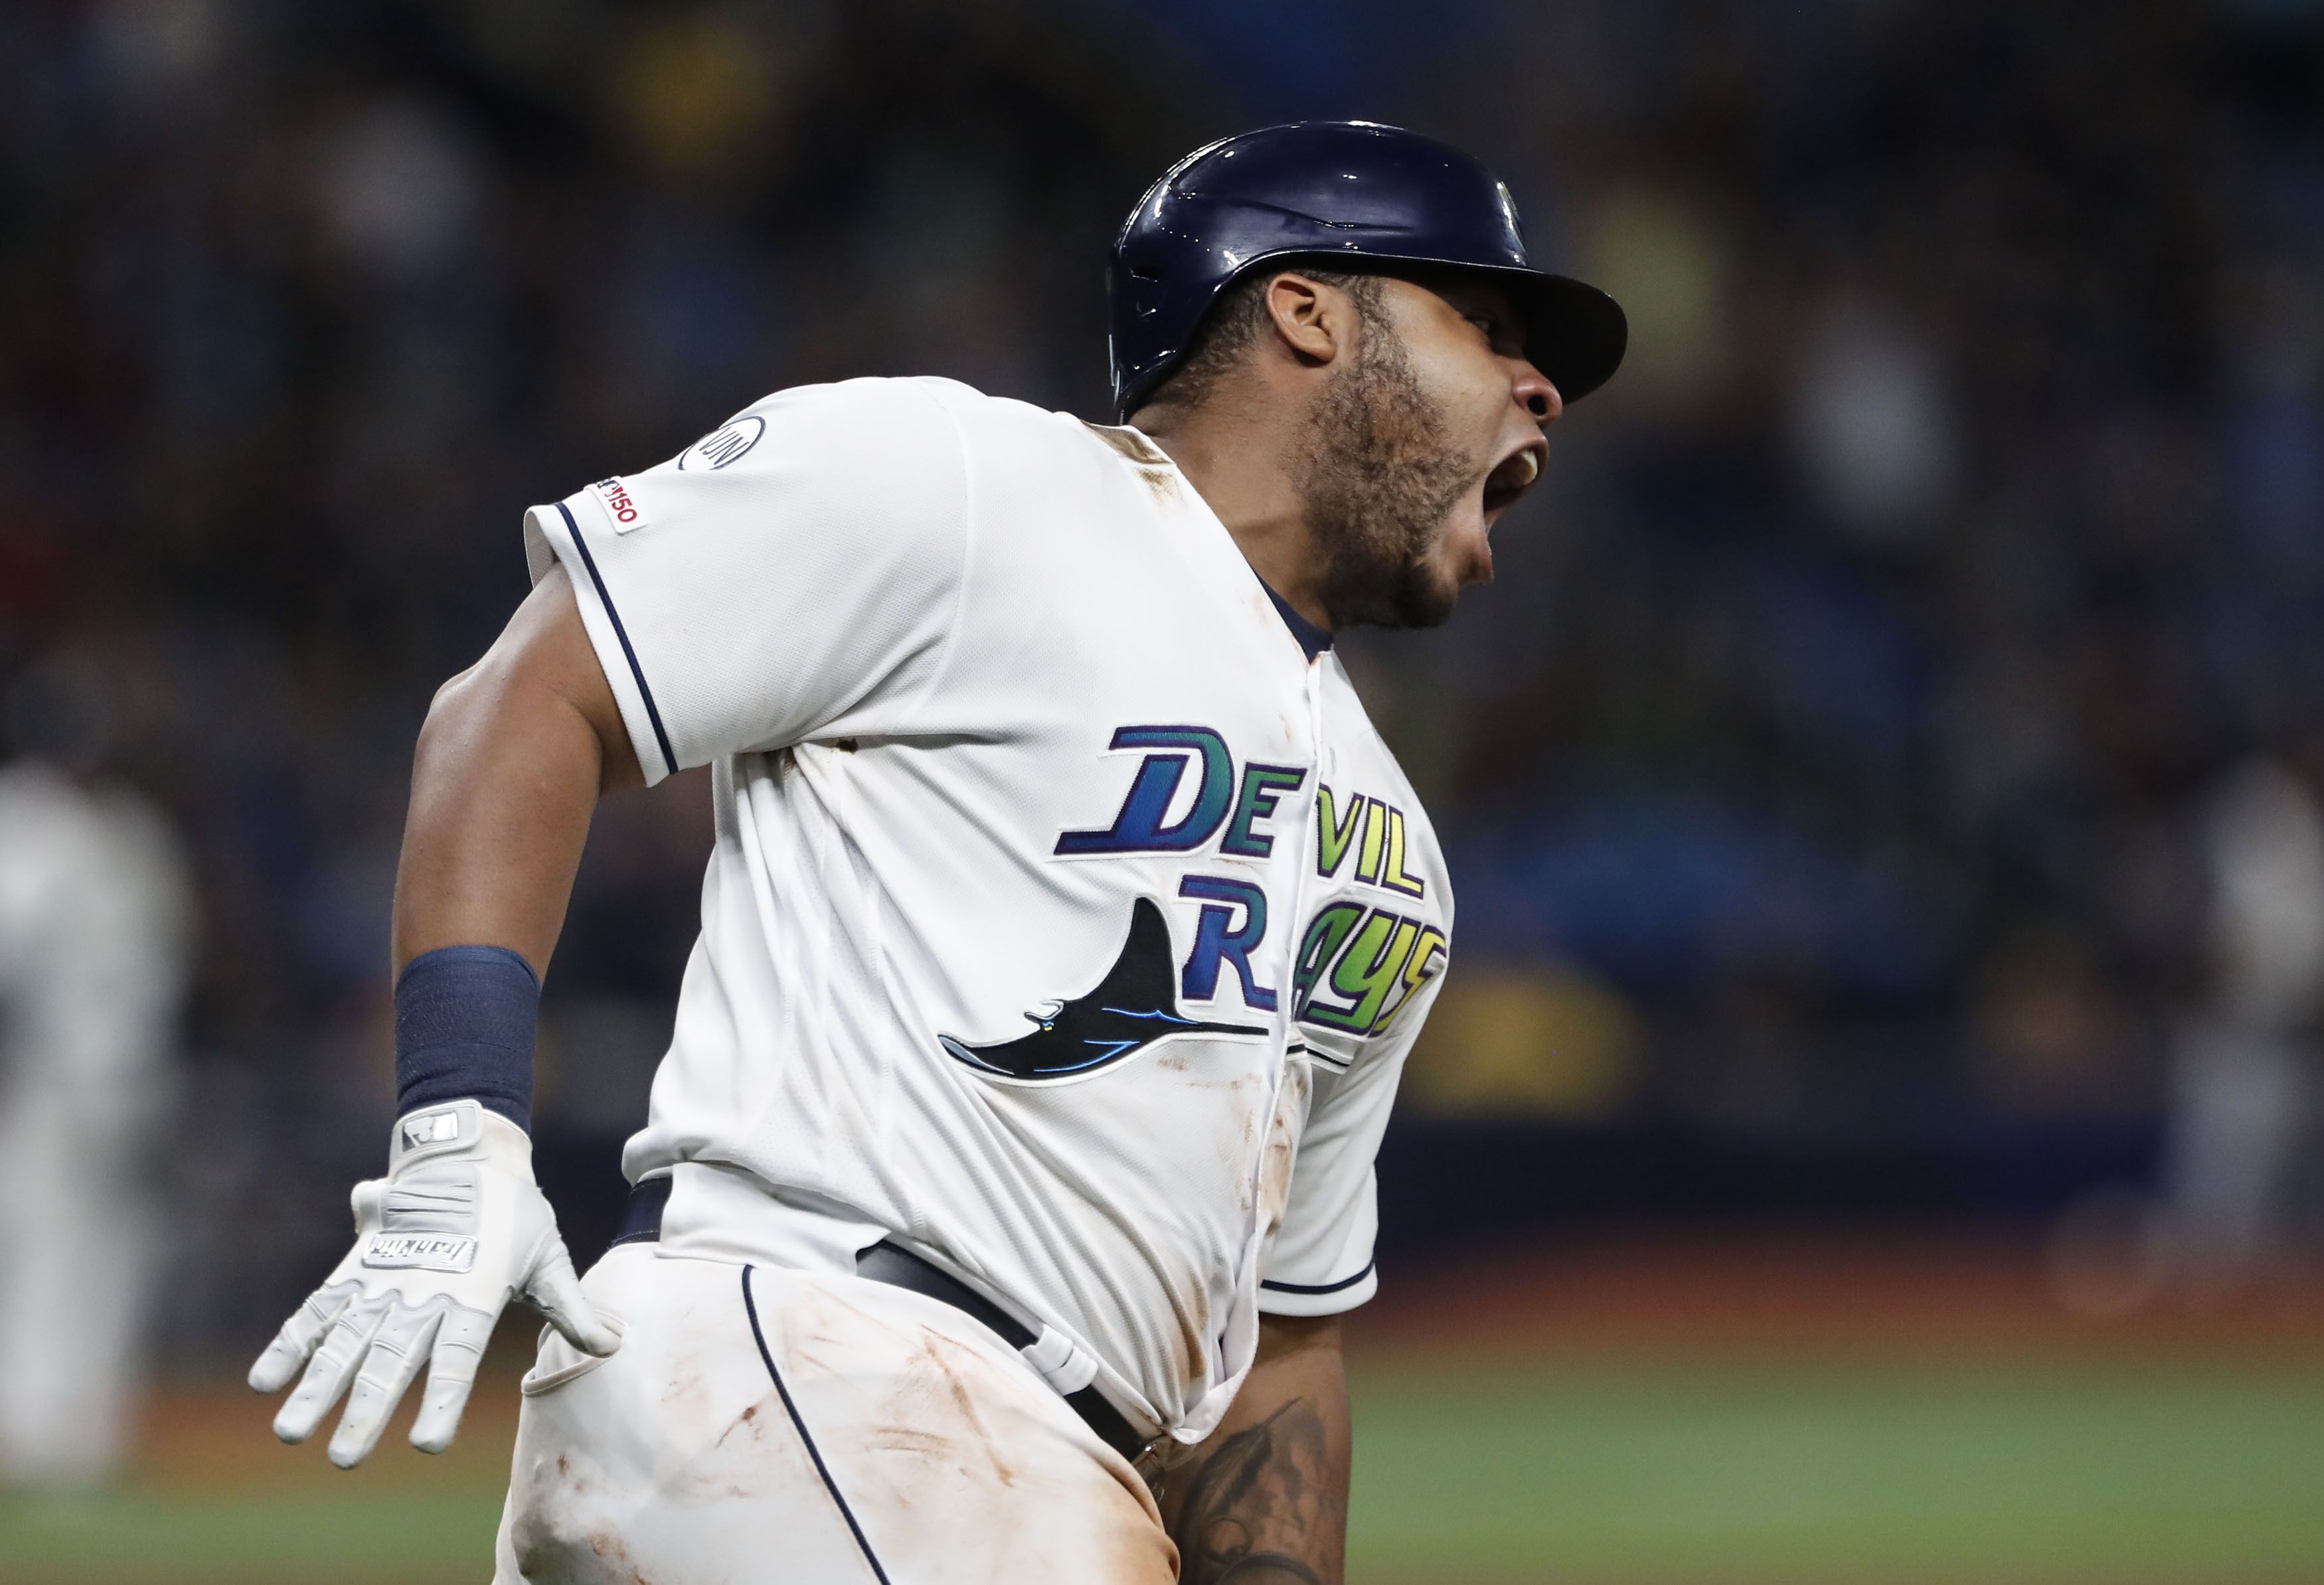 Rays' Isaac Paredes relieved to hit 30th home run, targets 100 RBIs